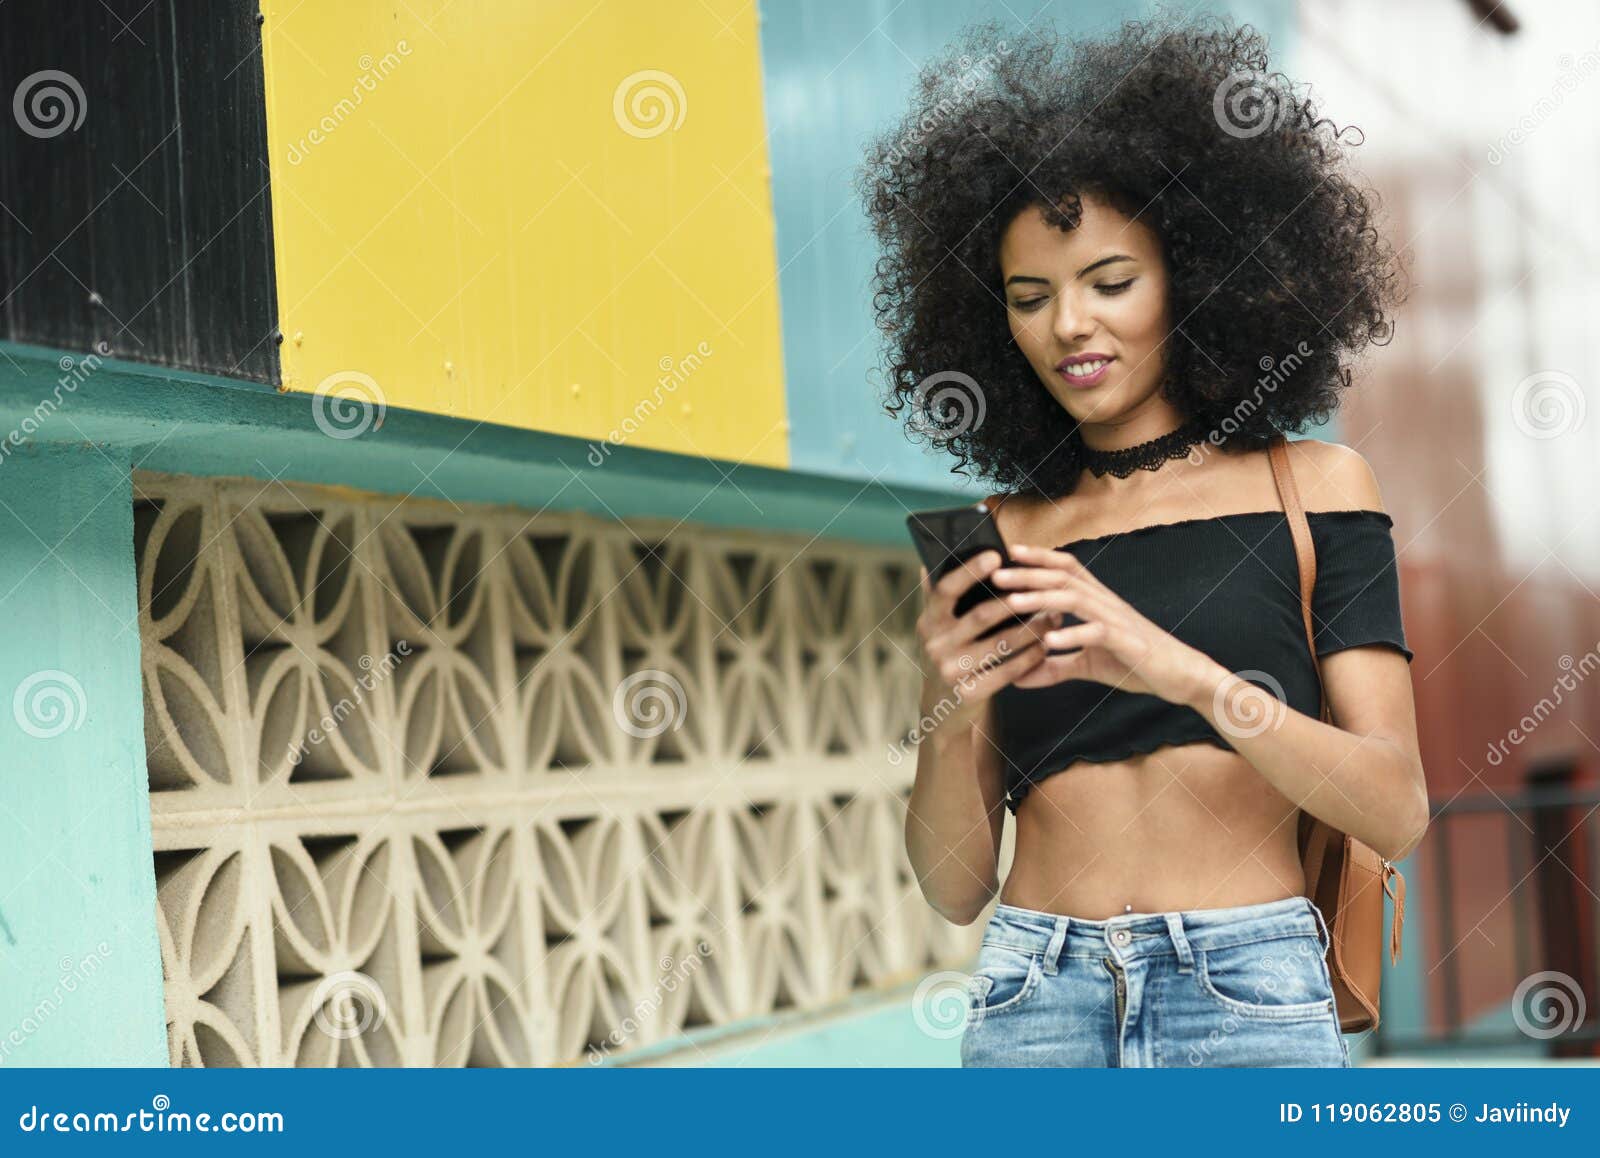 black woman afro hair on the street holding a smartphone